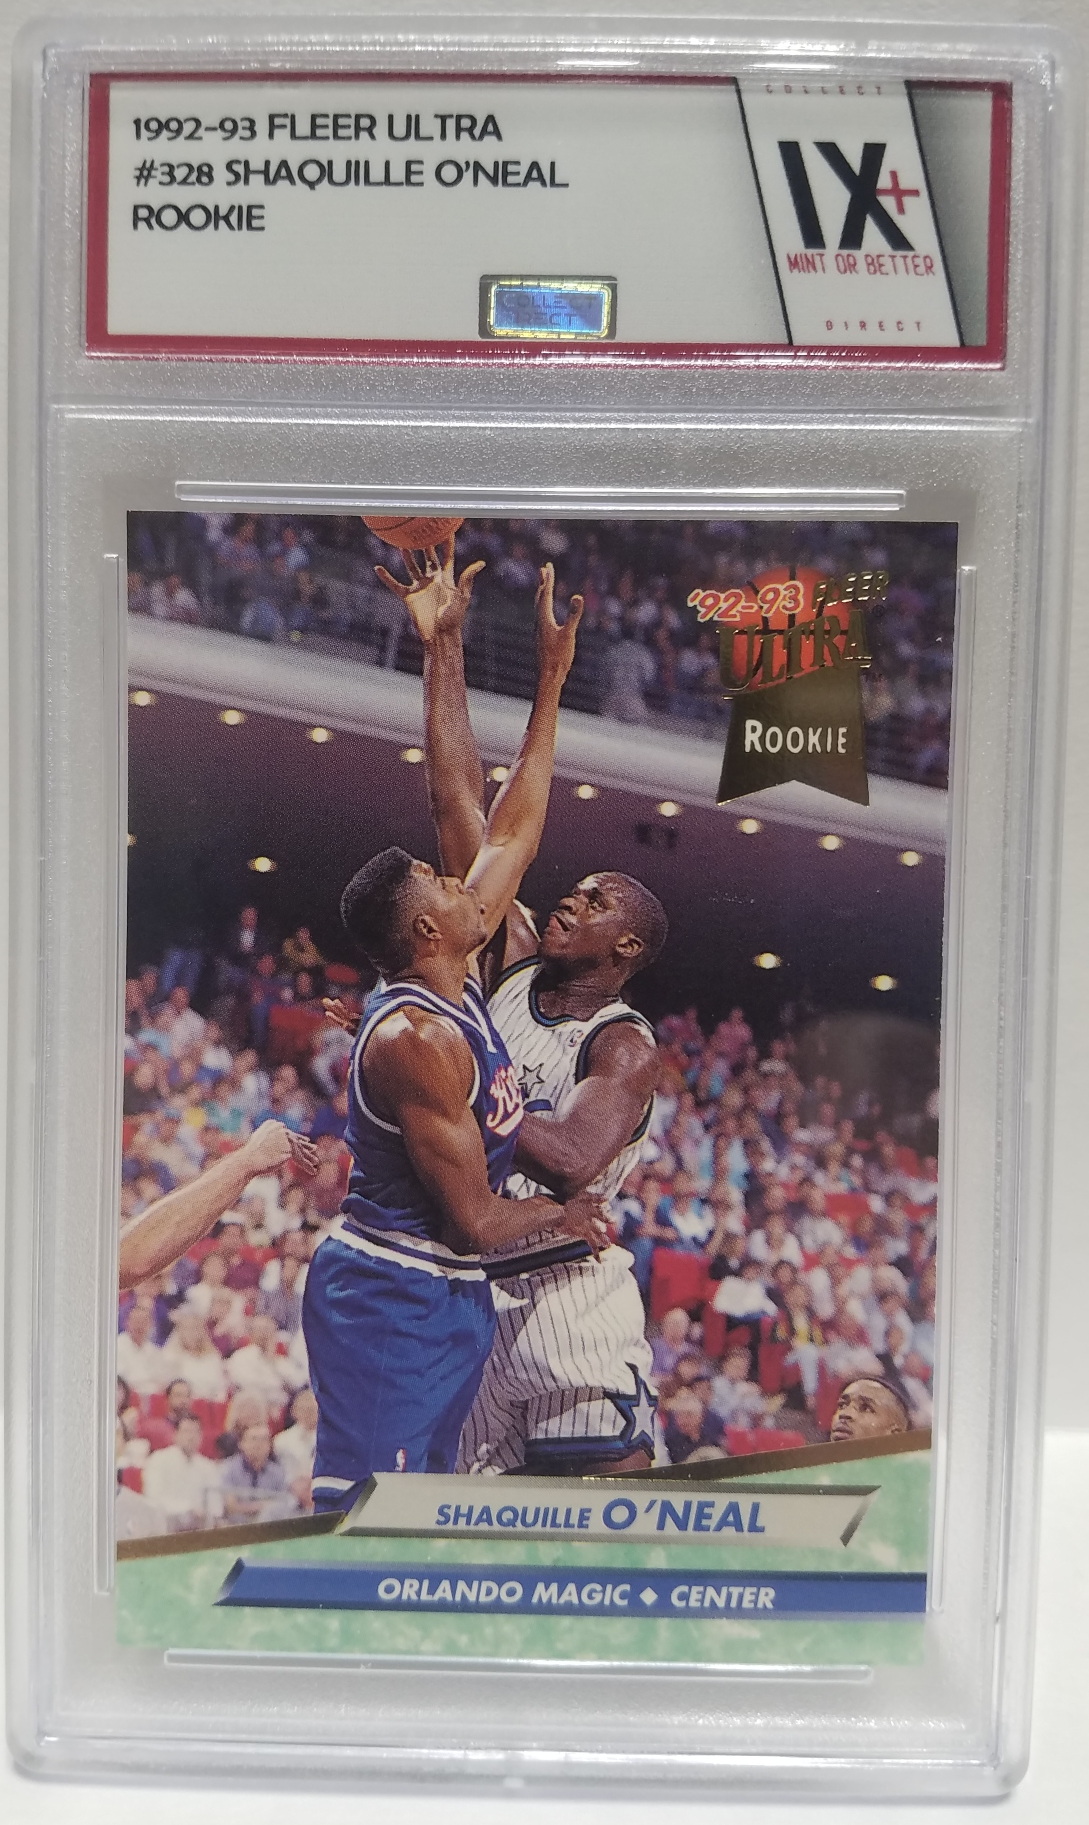 SHAQUILLE O'NEAL 1992-93 Fleer Ultra Rookie Card #328 Collect Direct Graded Mint Or Better ORLANDO MAGIC 1st Card